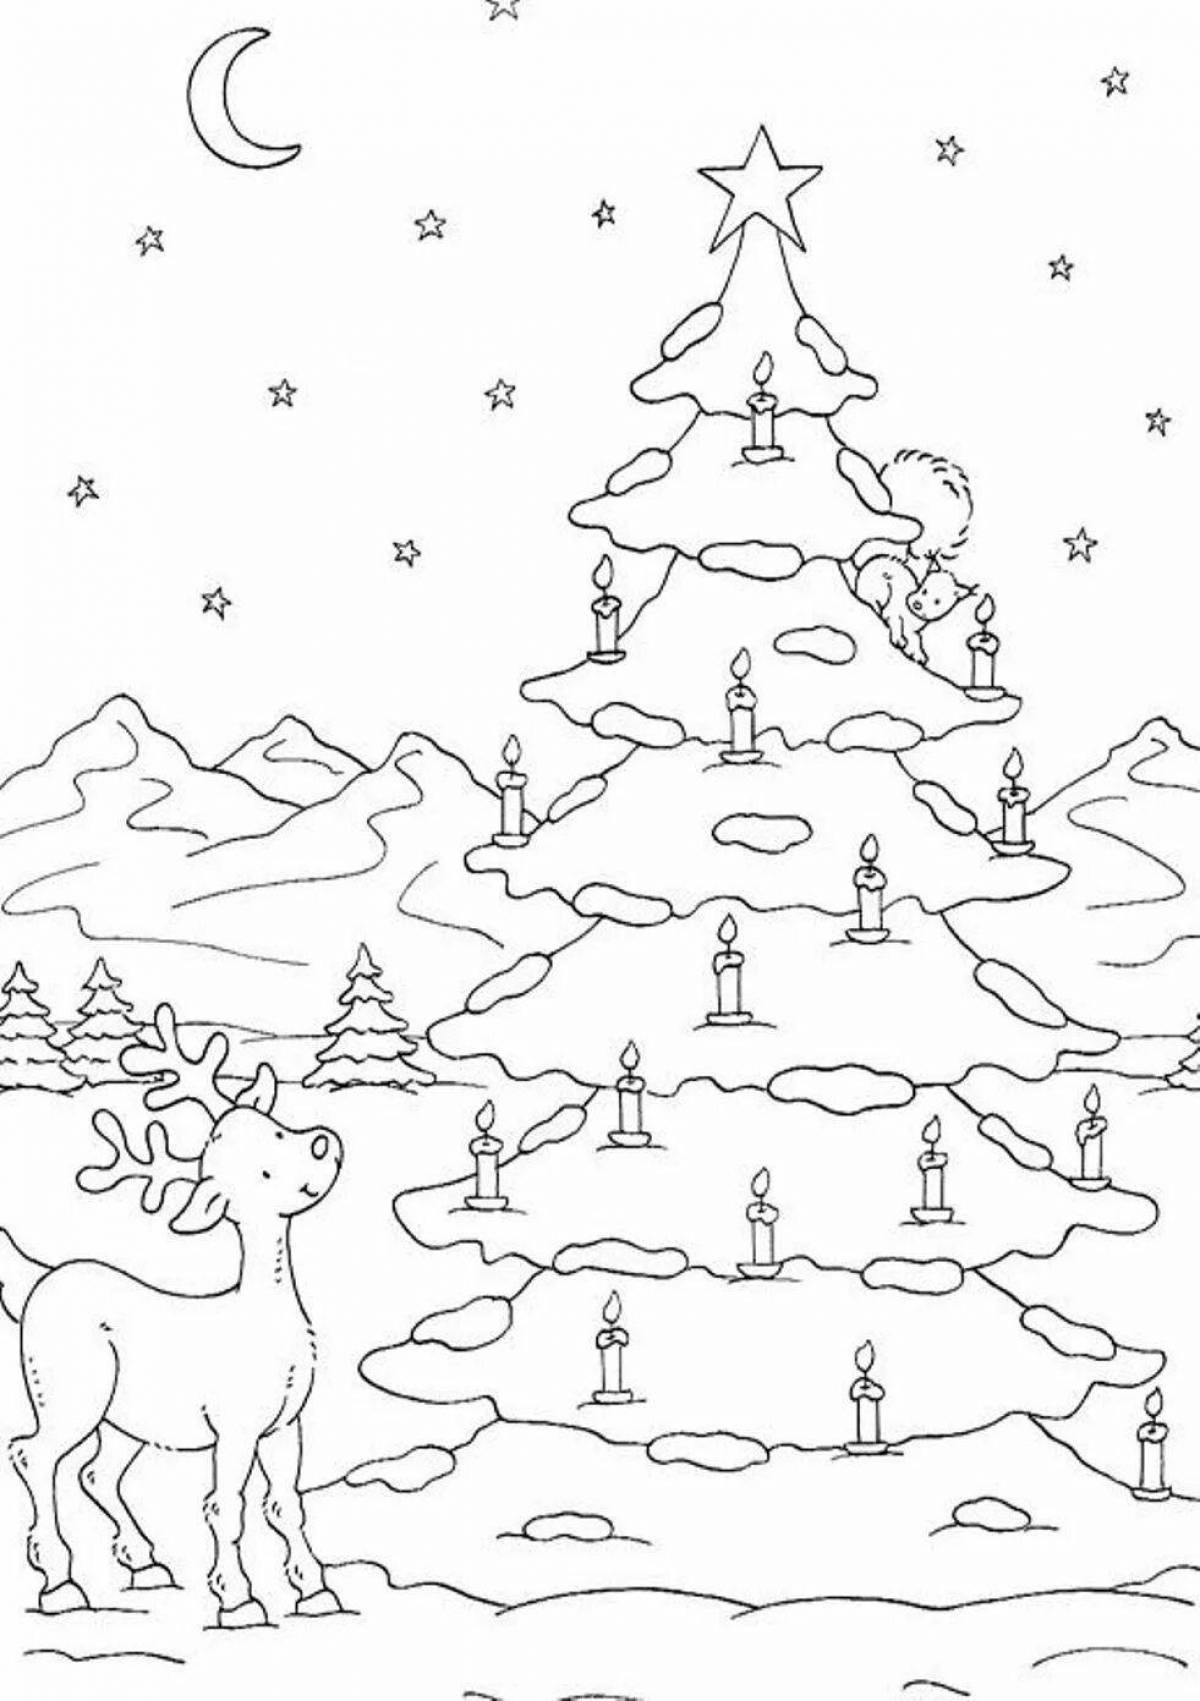 Sparkling Christmas tree coloring by numbers